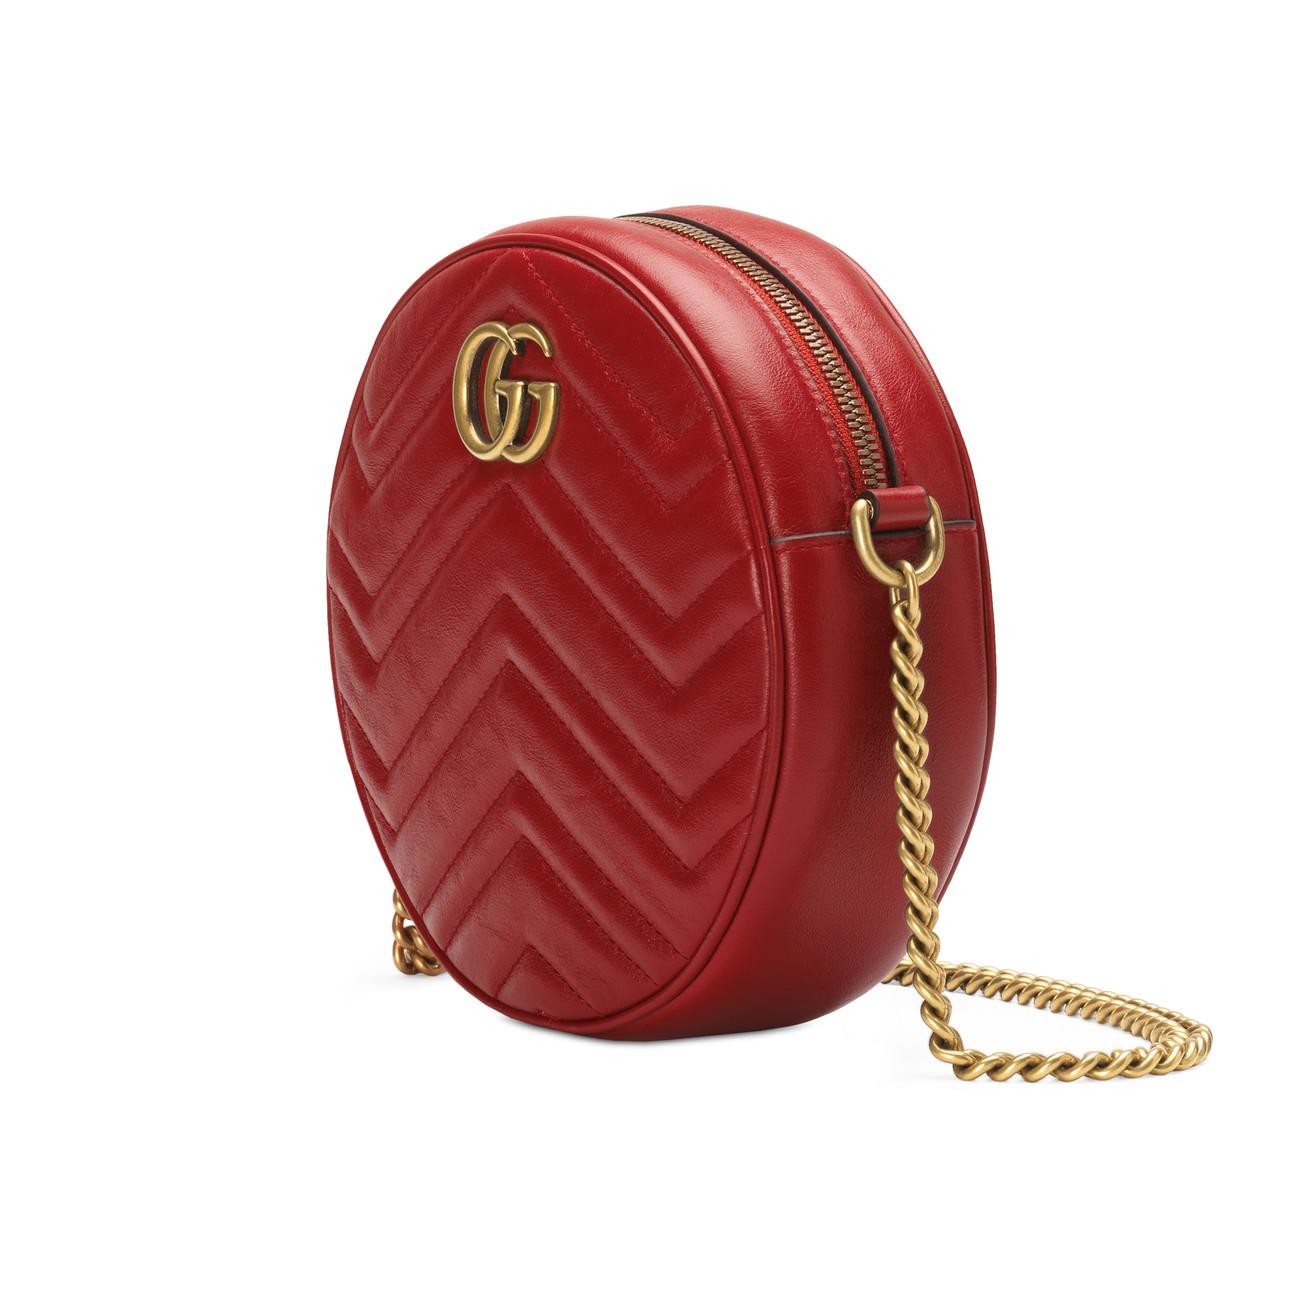 Gucci Leather GG Marmont Mini Round Shoulder Bag in Red - Lyst